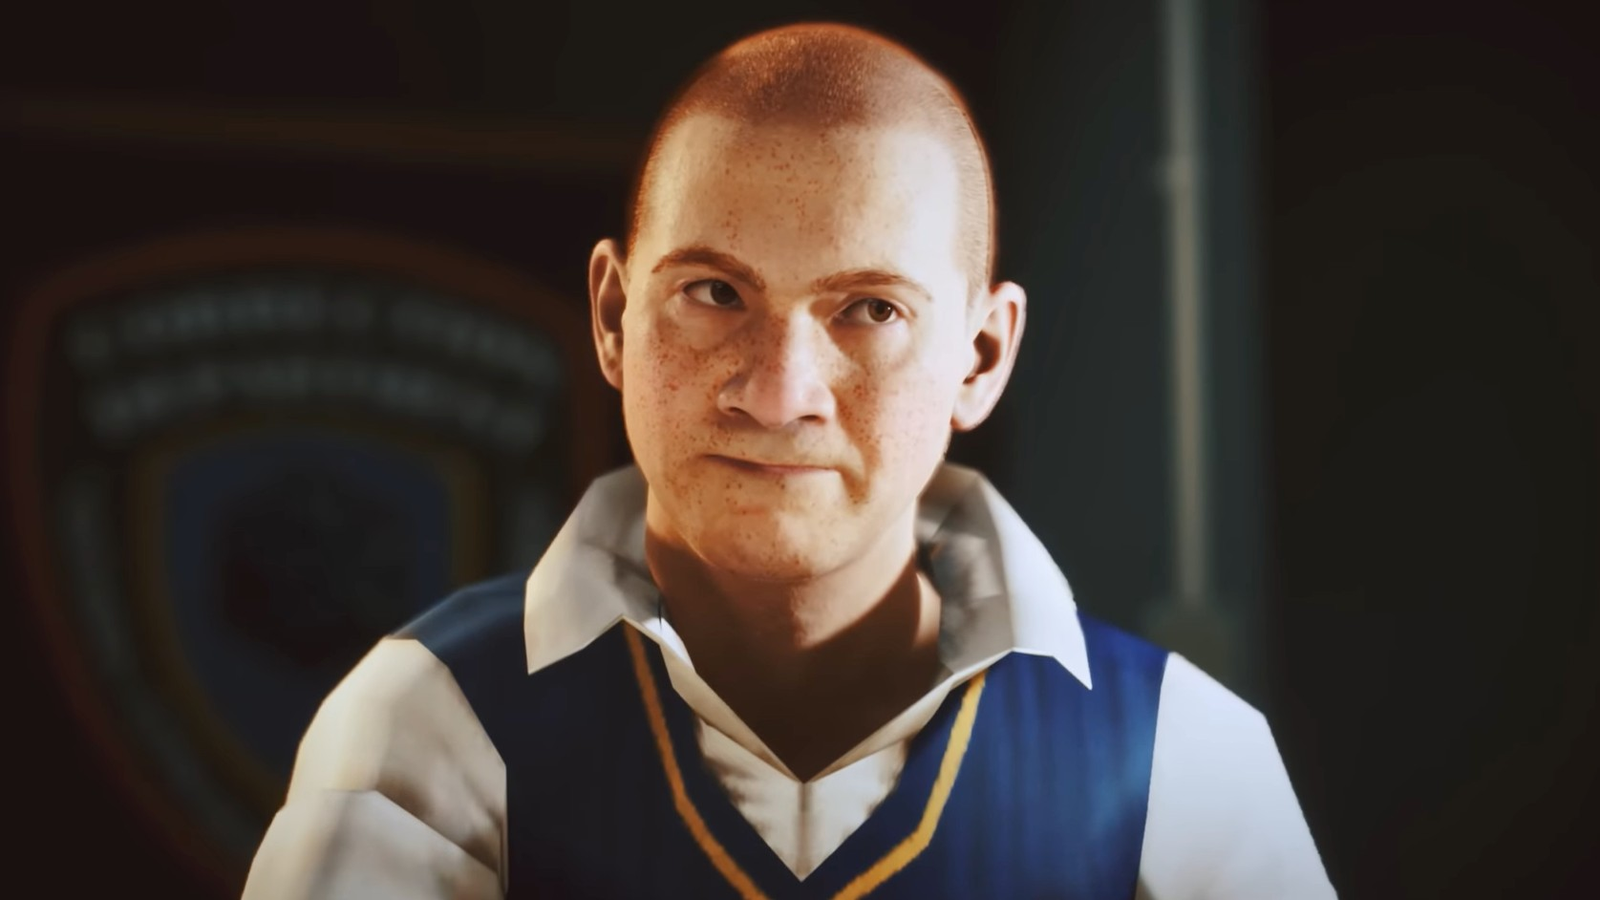  Bully: Scholarship Edition : Video Games